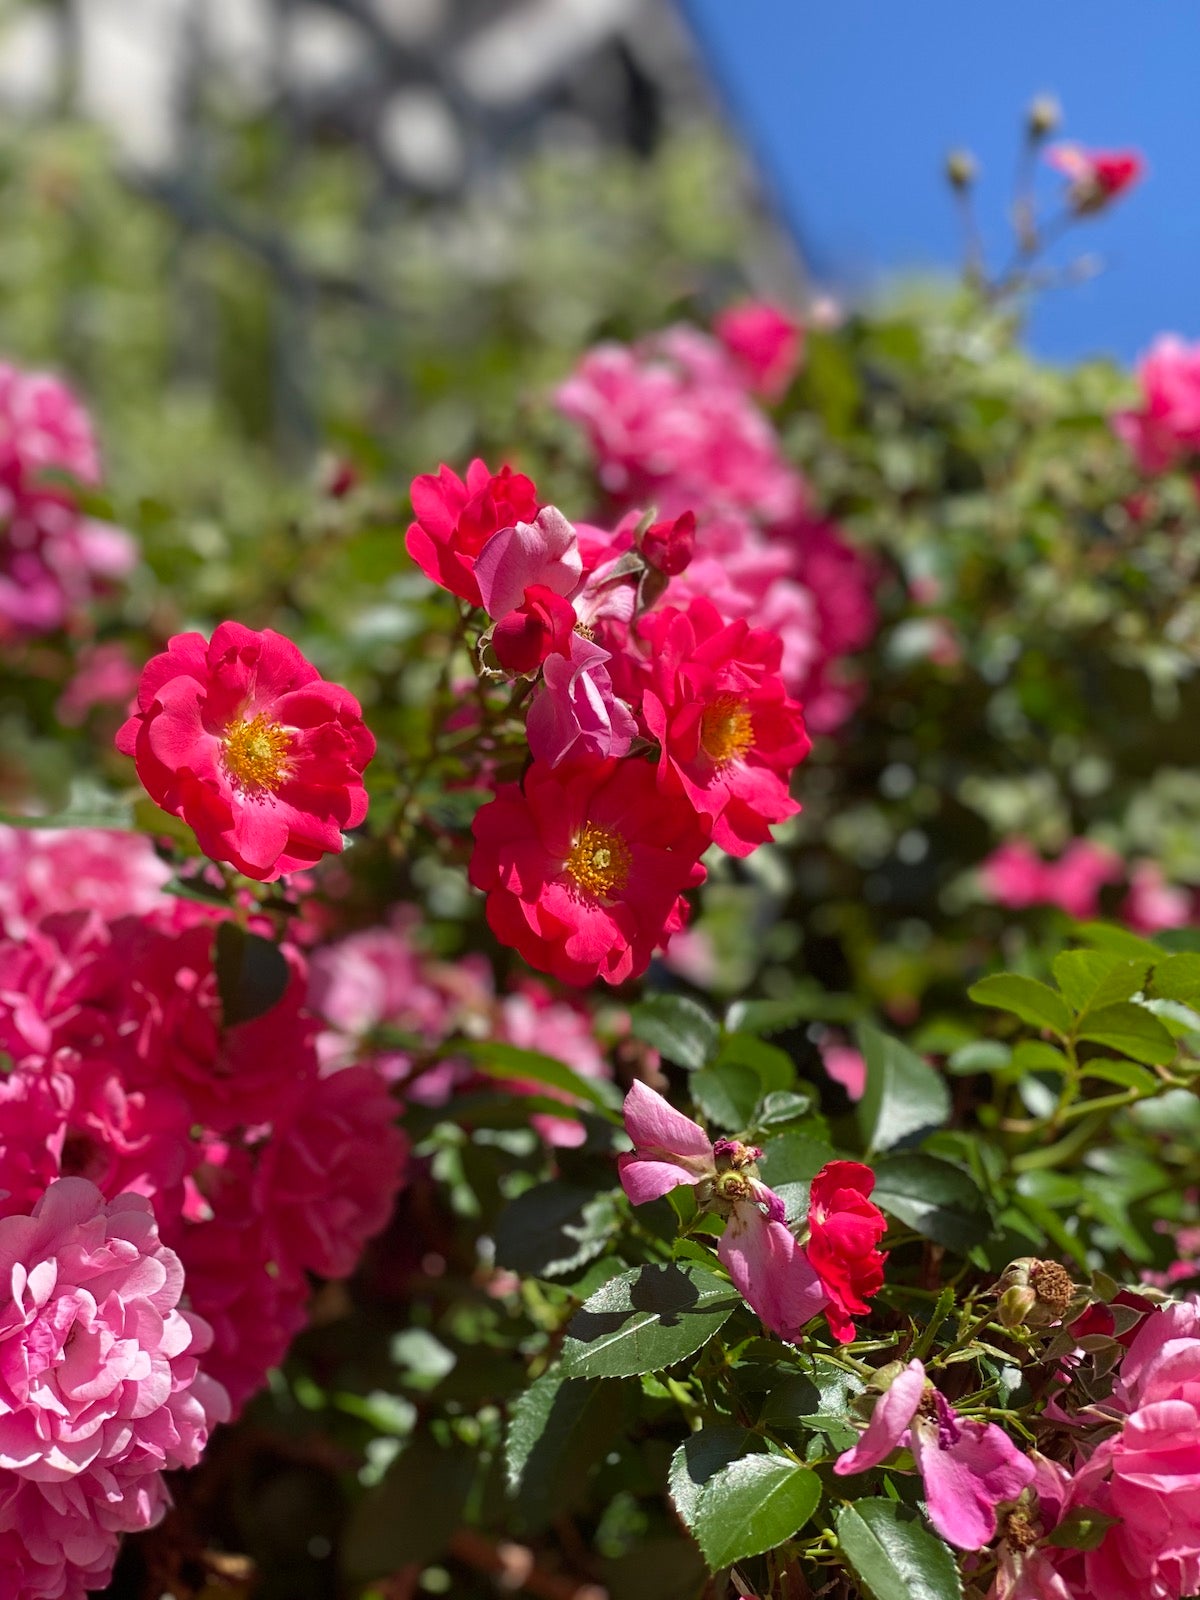 Flower-Filled Foreground - Pink Flowers